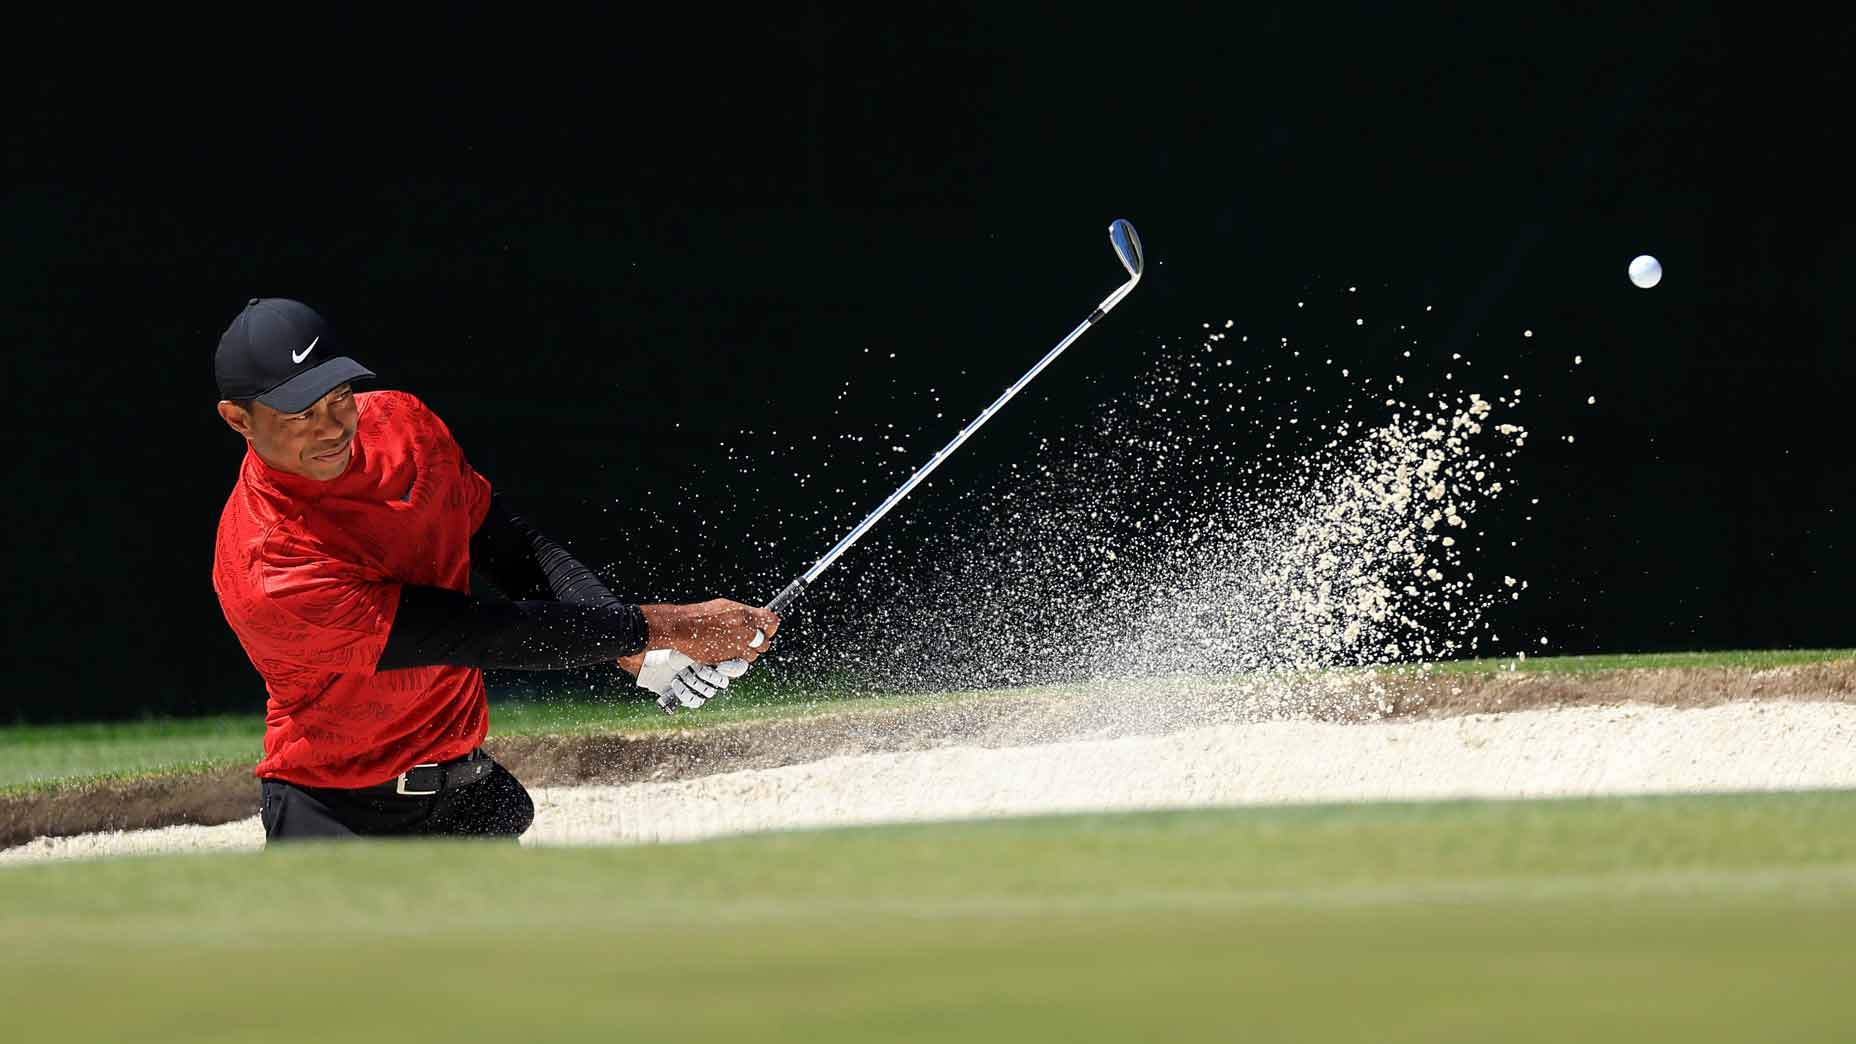 tiger woods hits bunker shot during final round of the 2022 masters at augusta national